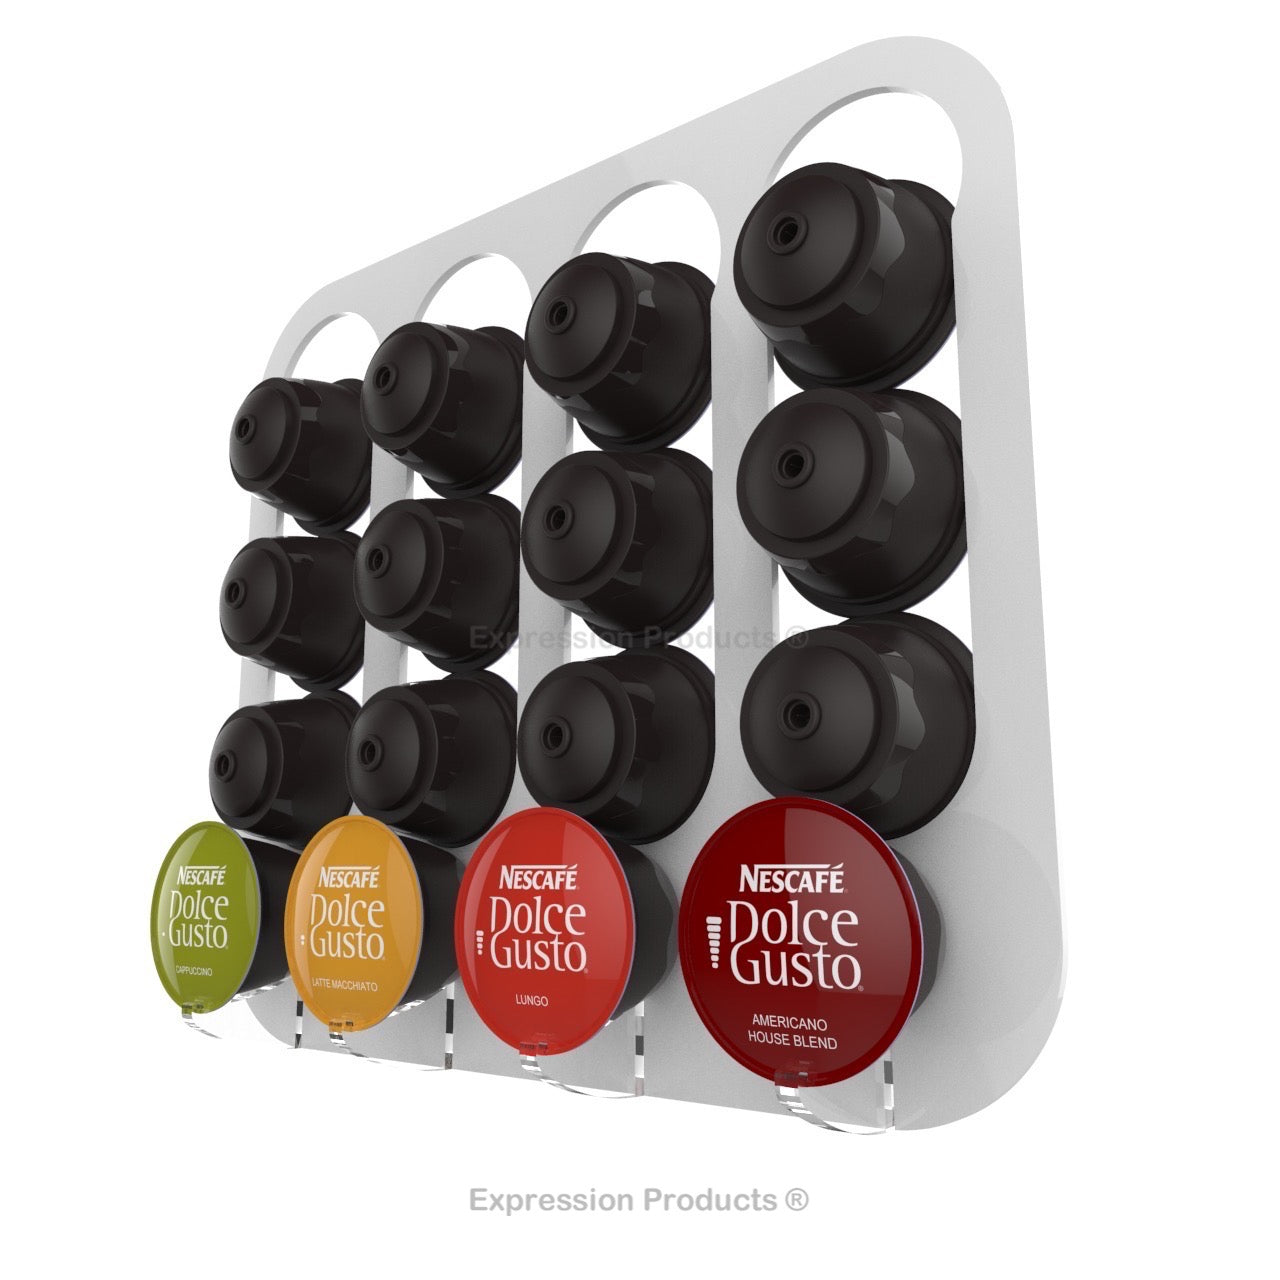 Dolce gusto coffee pod holder, wall mounted, half height.  Shown in white holding 16 pods